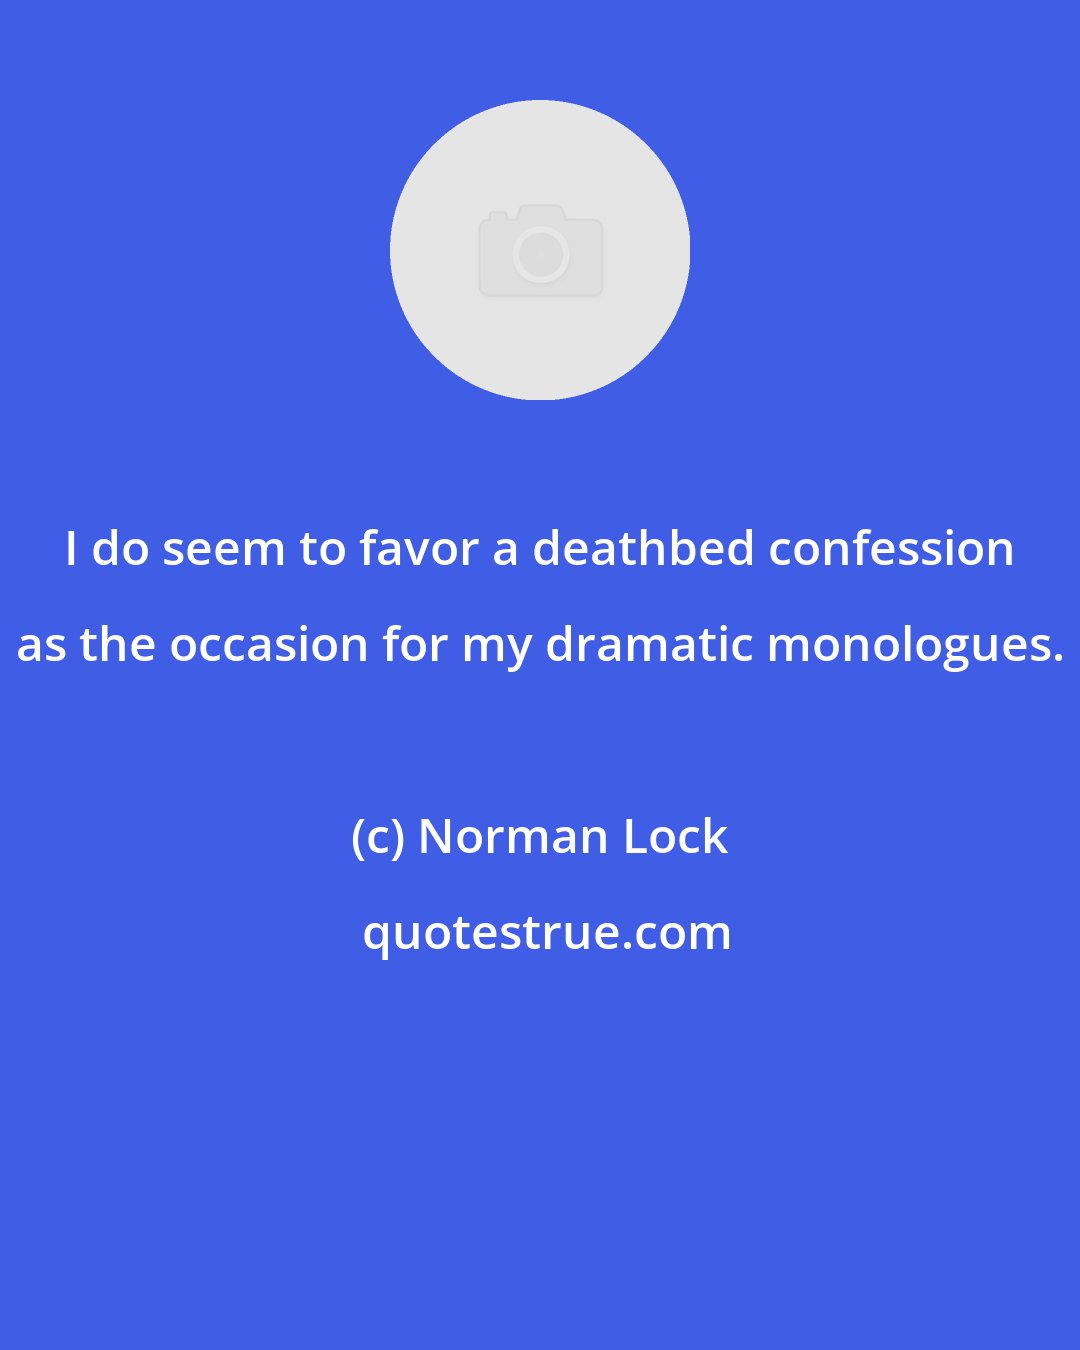 Norman Lock: I do seem to favor a deathbed confession as the occasion for my dramatic monologues.